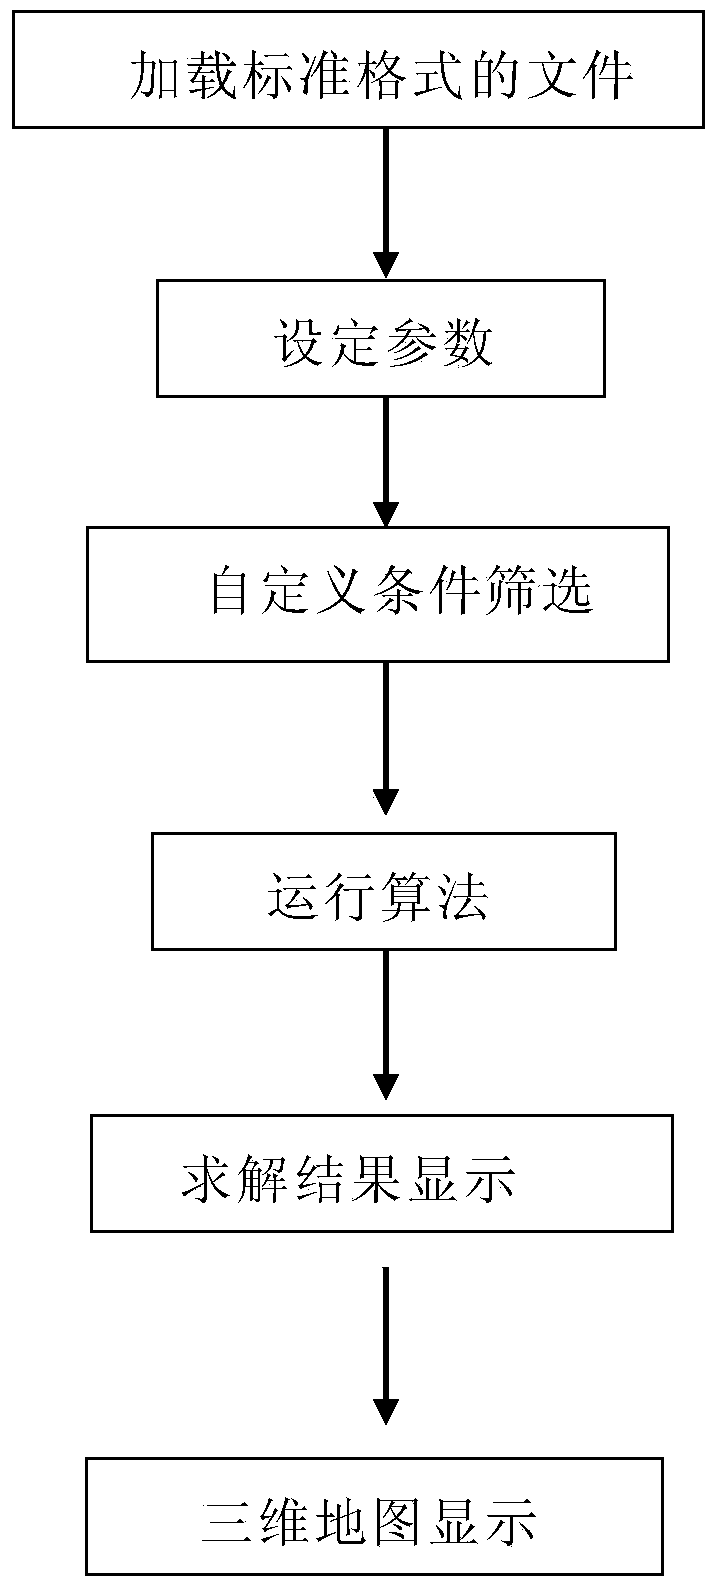 Comprehensive planning method for paths of vehicles for picking up goods